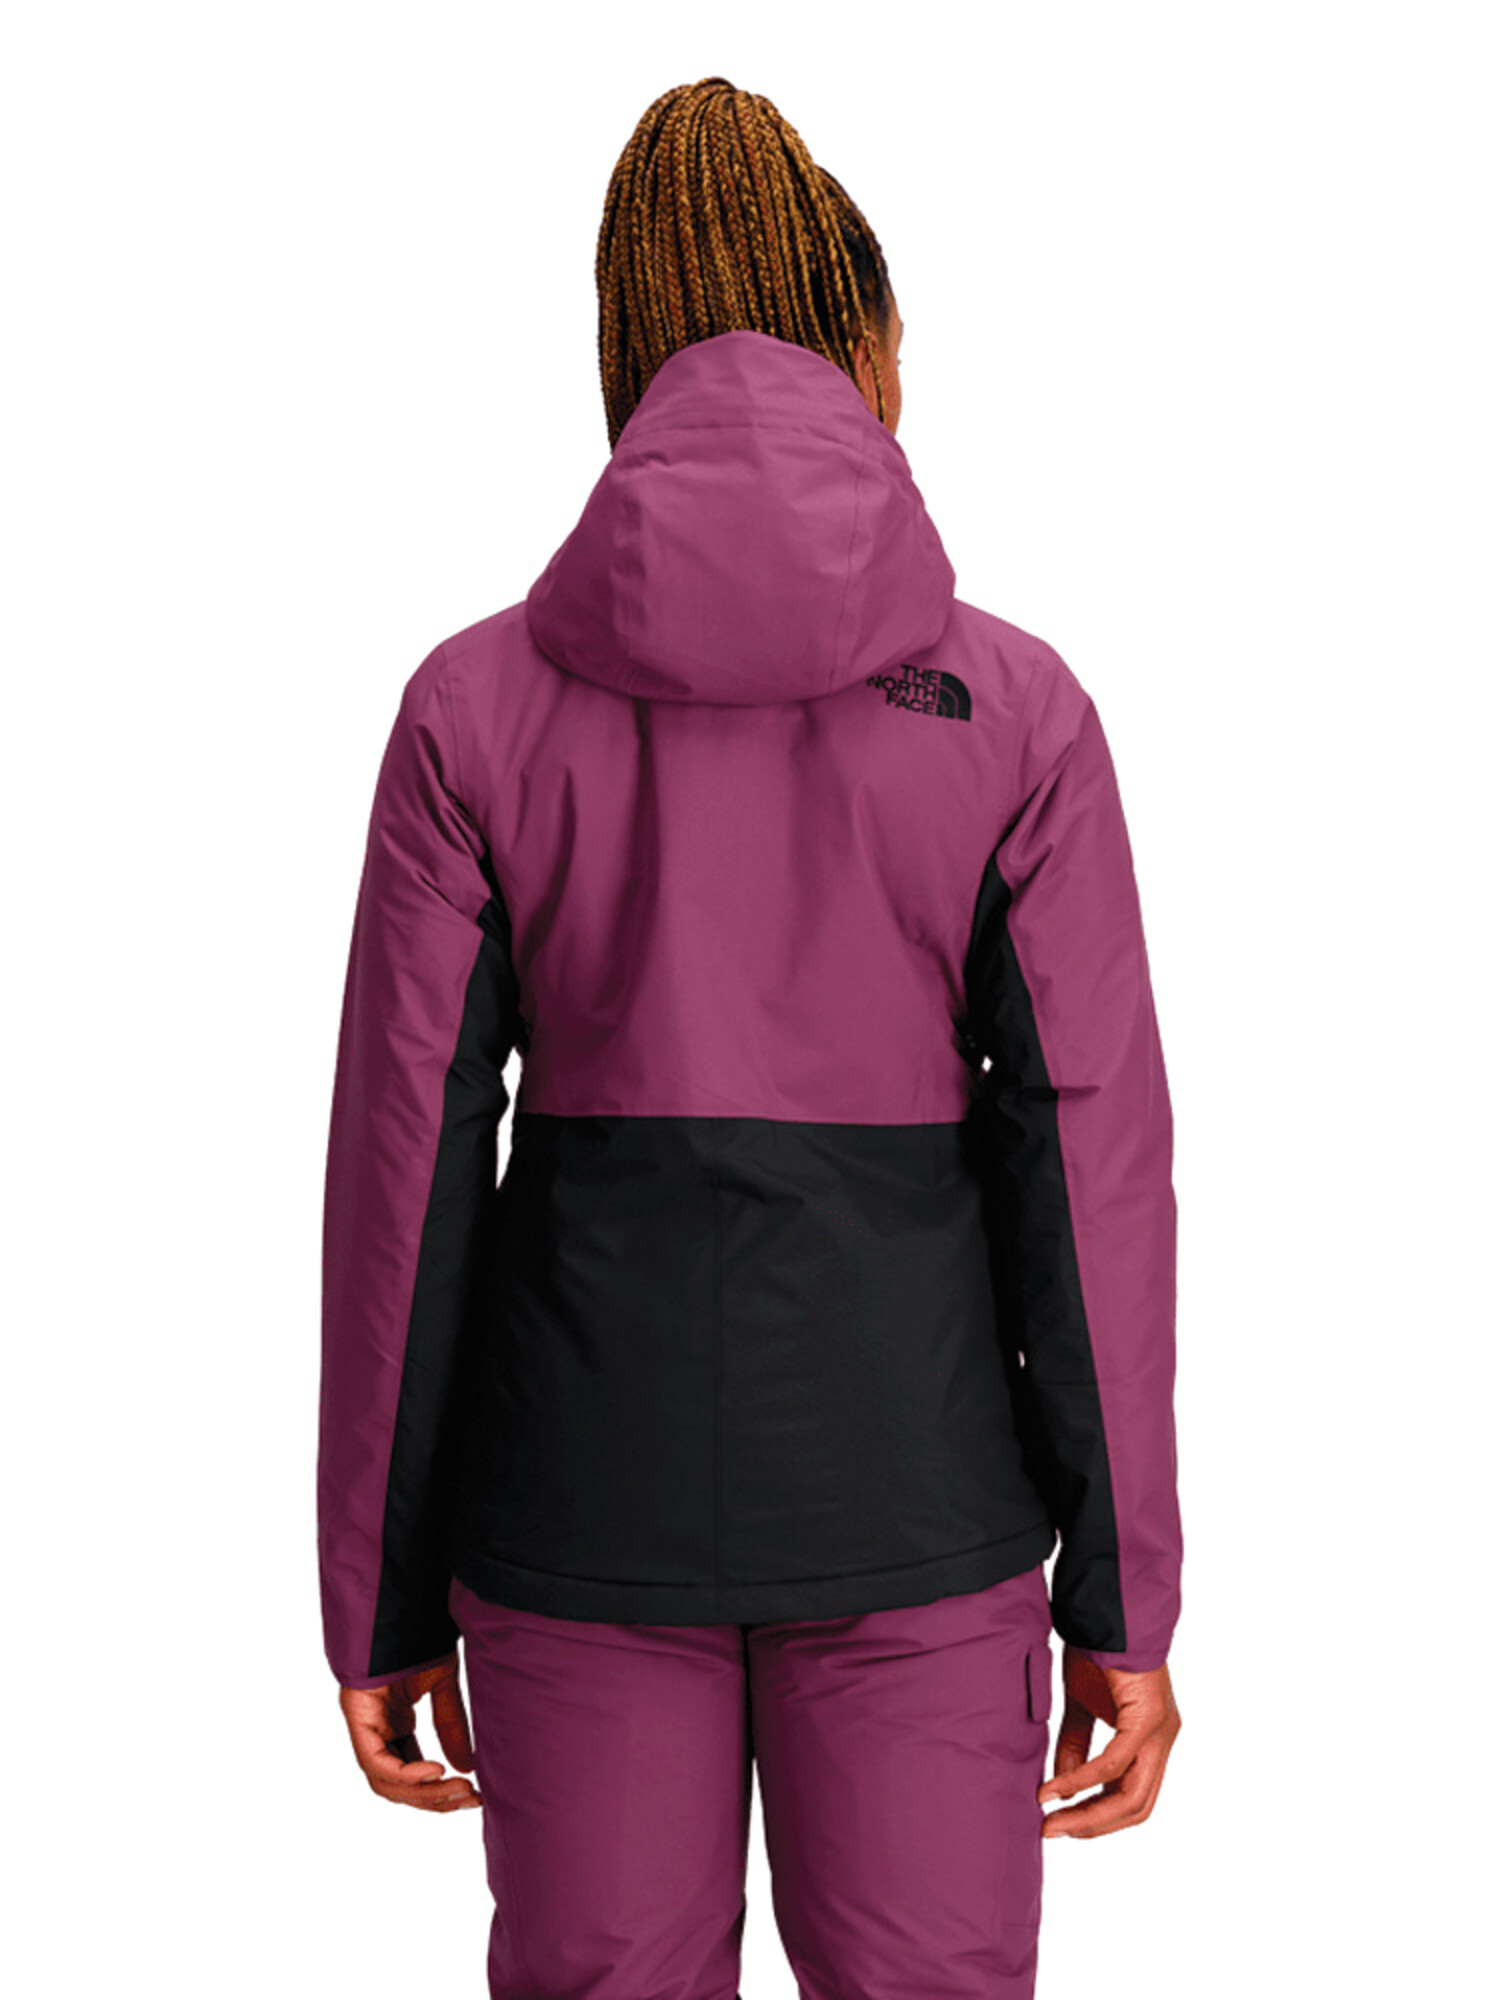 https://cdn.shoplightspeed.com/shops/659992/files/56804185/1500x4000x3/the-north-face-the-north-face-freedom-insulated-ja.jpg